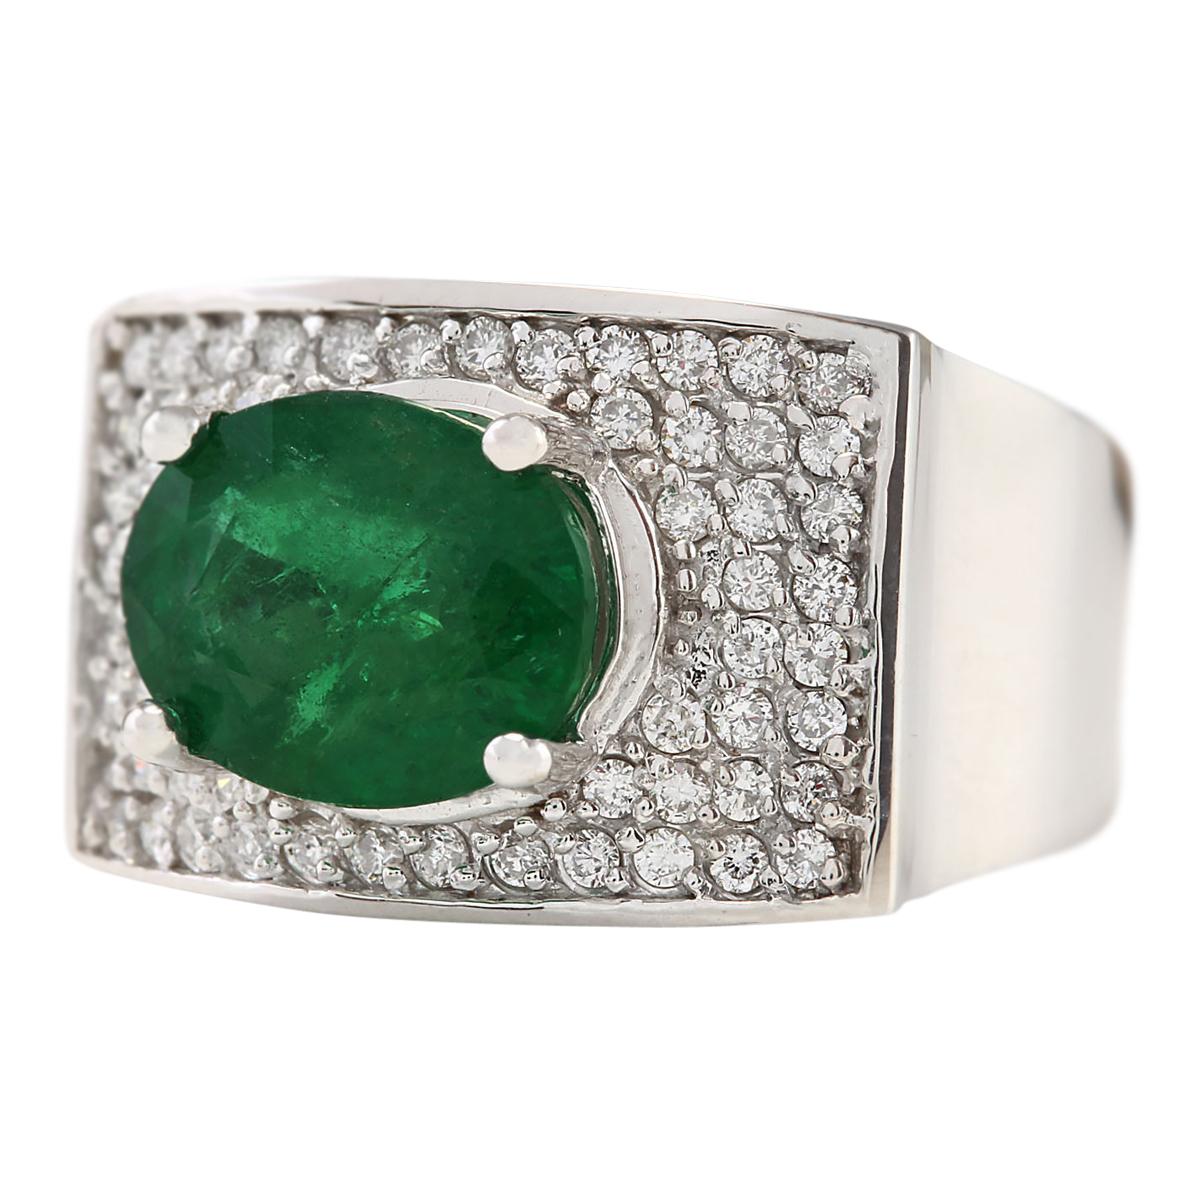 Stamped: 14K White Gold
Total Ring Weight: 10.0 Grams
Total Natural Emerald Weight is 4.08 Carat (Measures: 11.00x9.00 mm)
Color: Green
Total Natural Diamond Weight is 0.70 Carat
Color: F-G, Clarity: VS2-SI1
Face Measures: 13.70x19.95 mm
Sku: